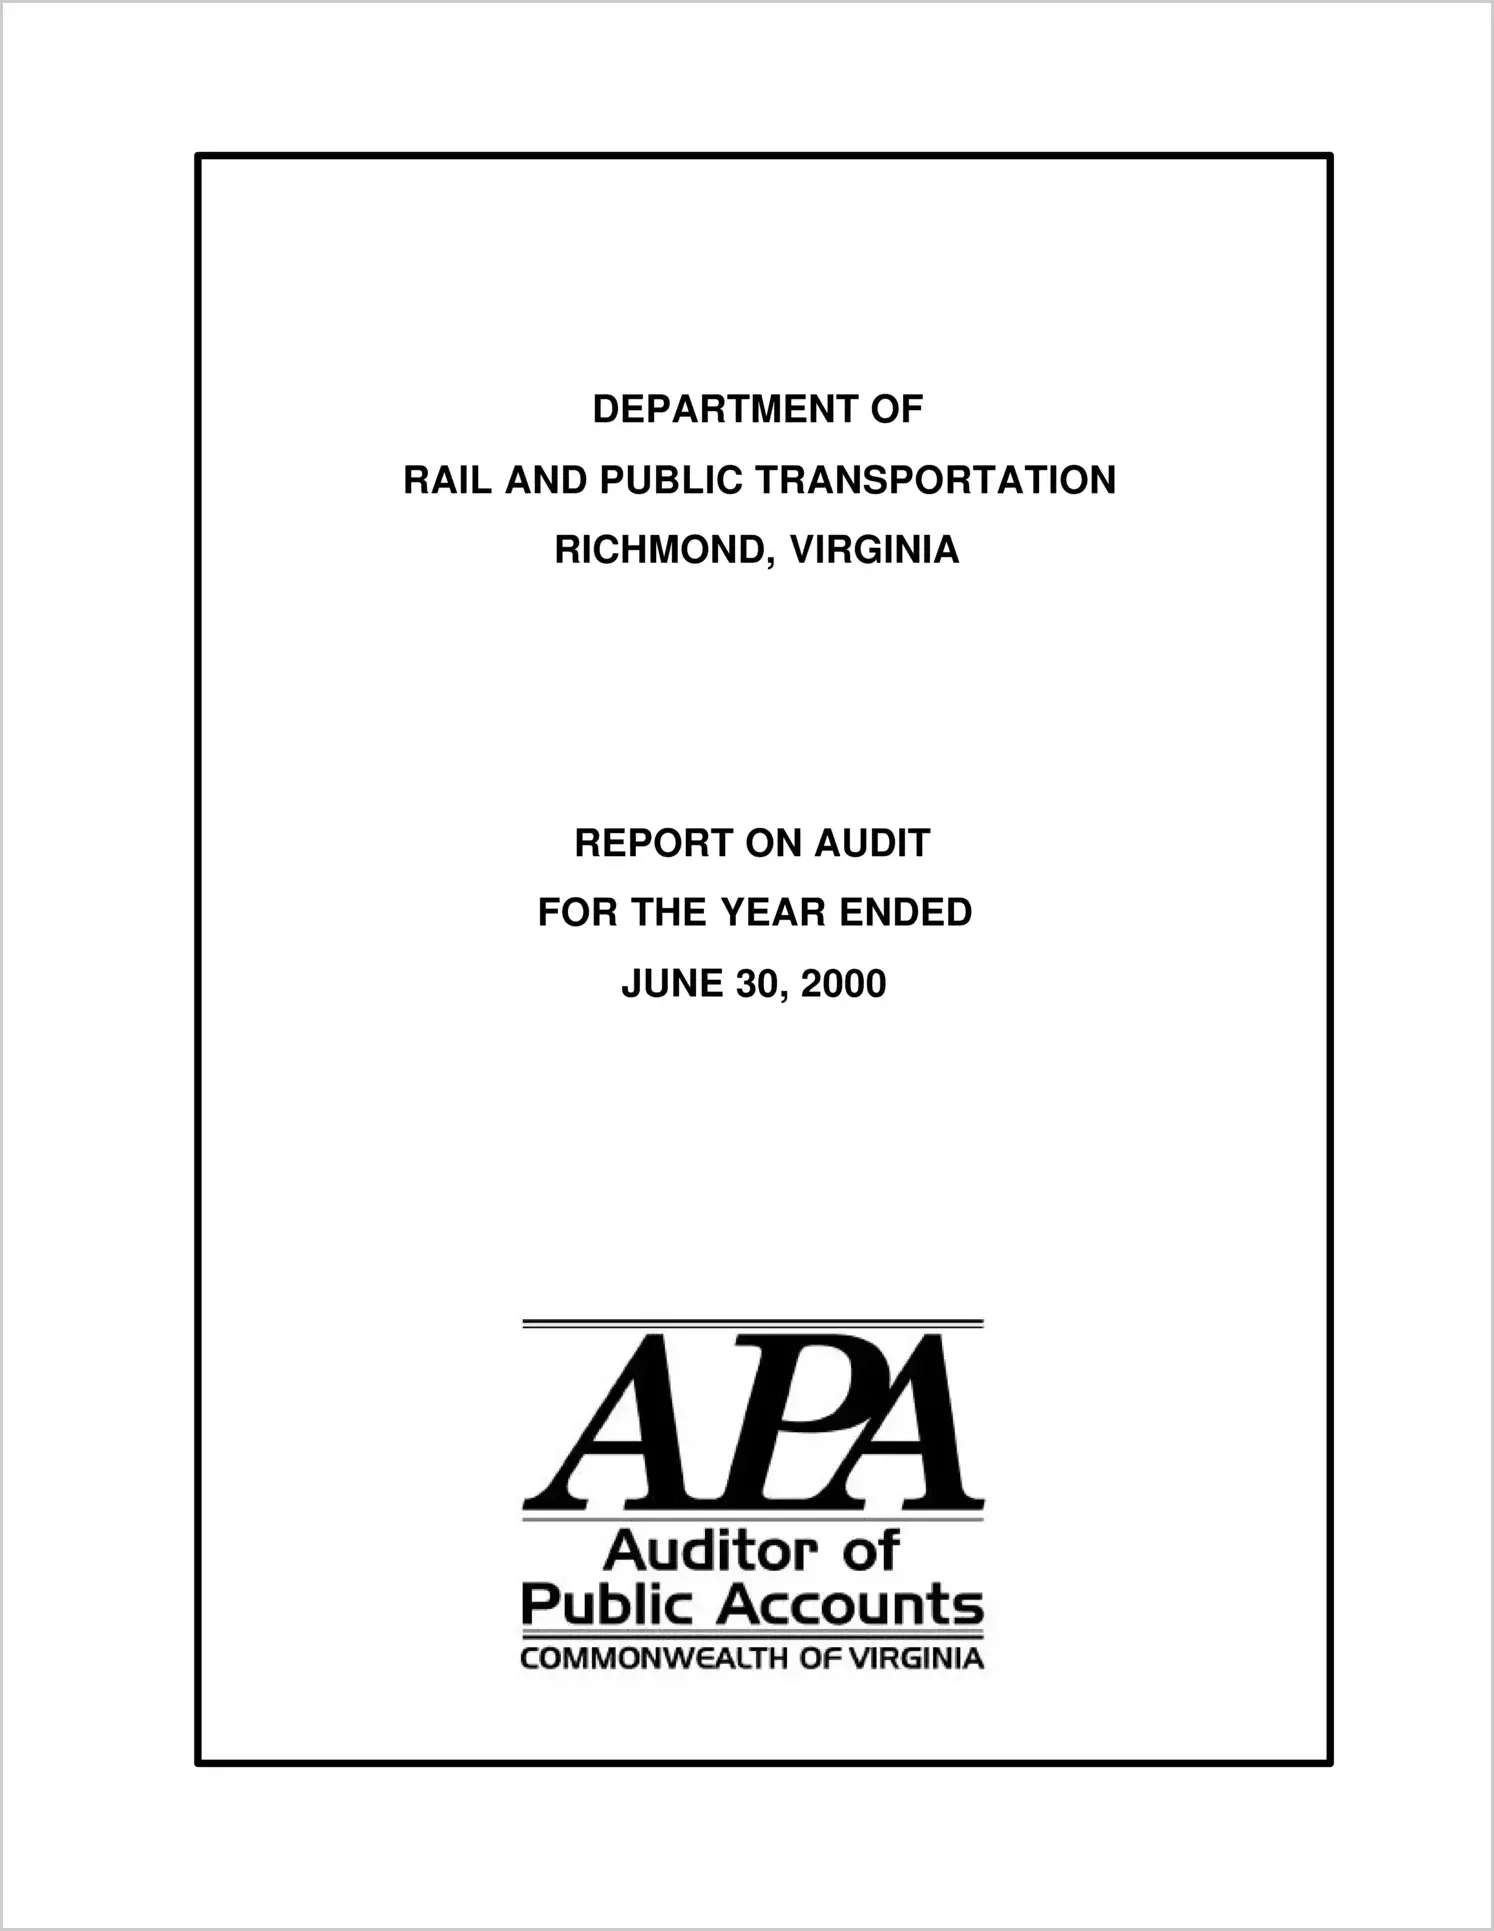 Department of Rail and Public Transportation for the year ended June 30, 2000